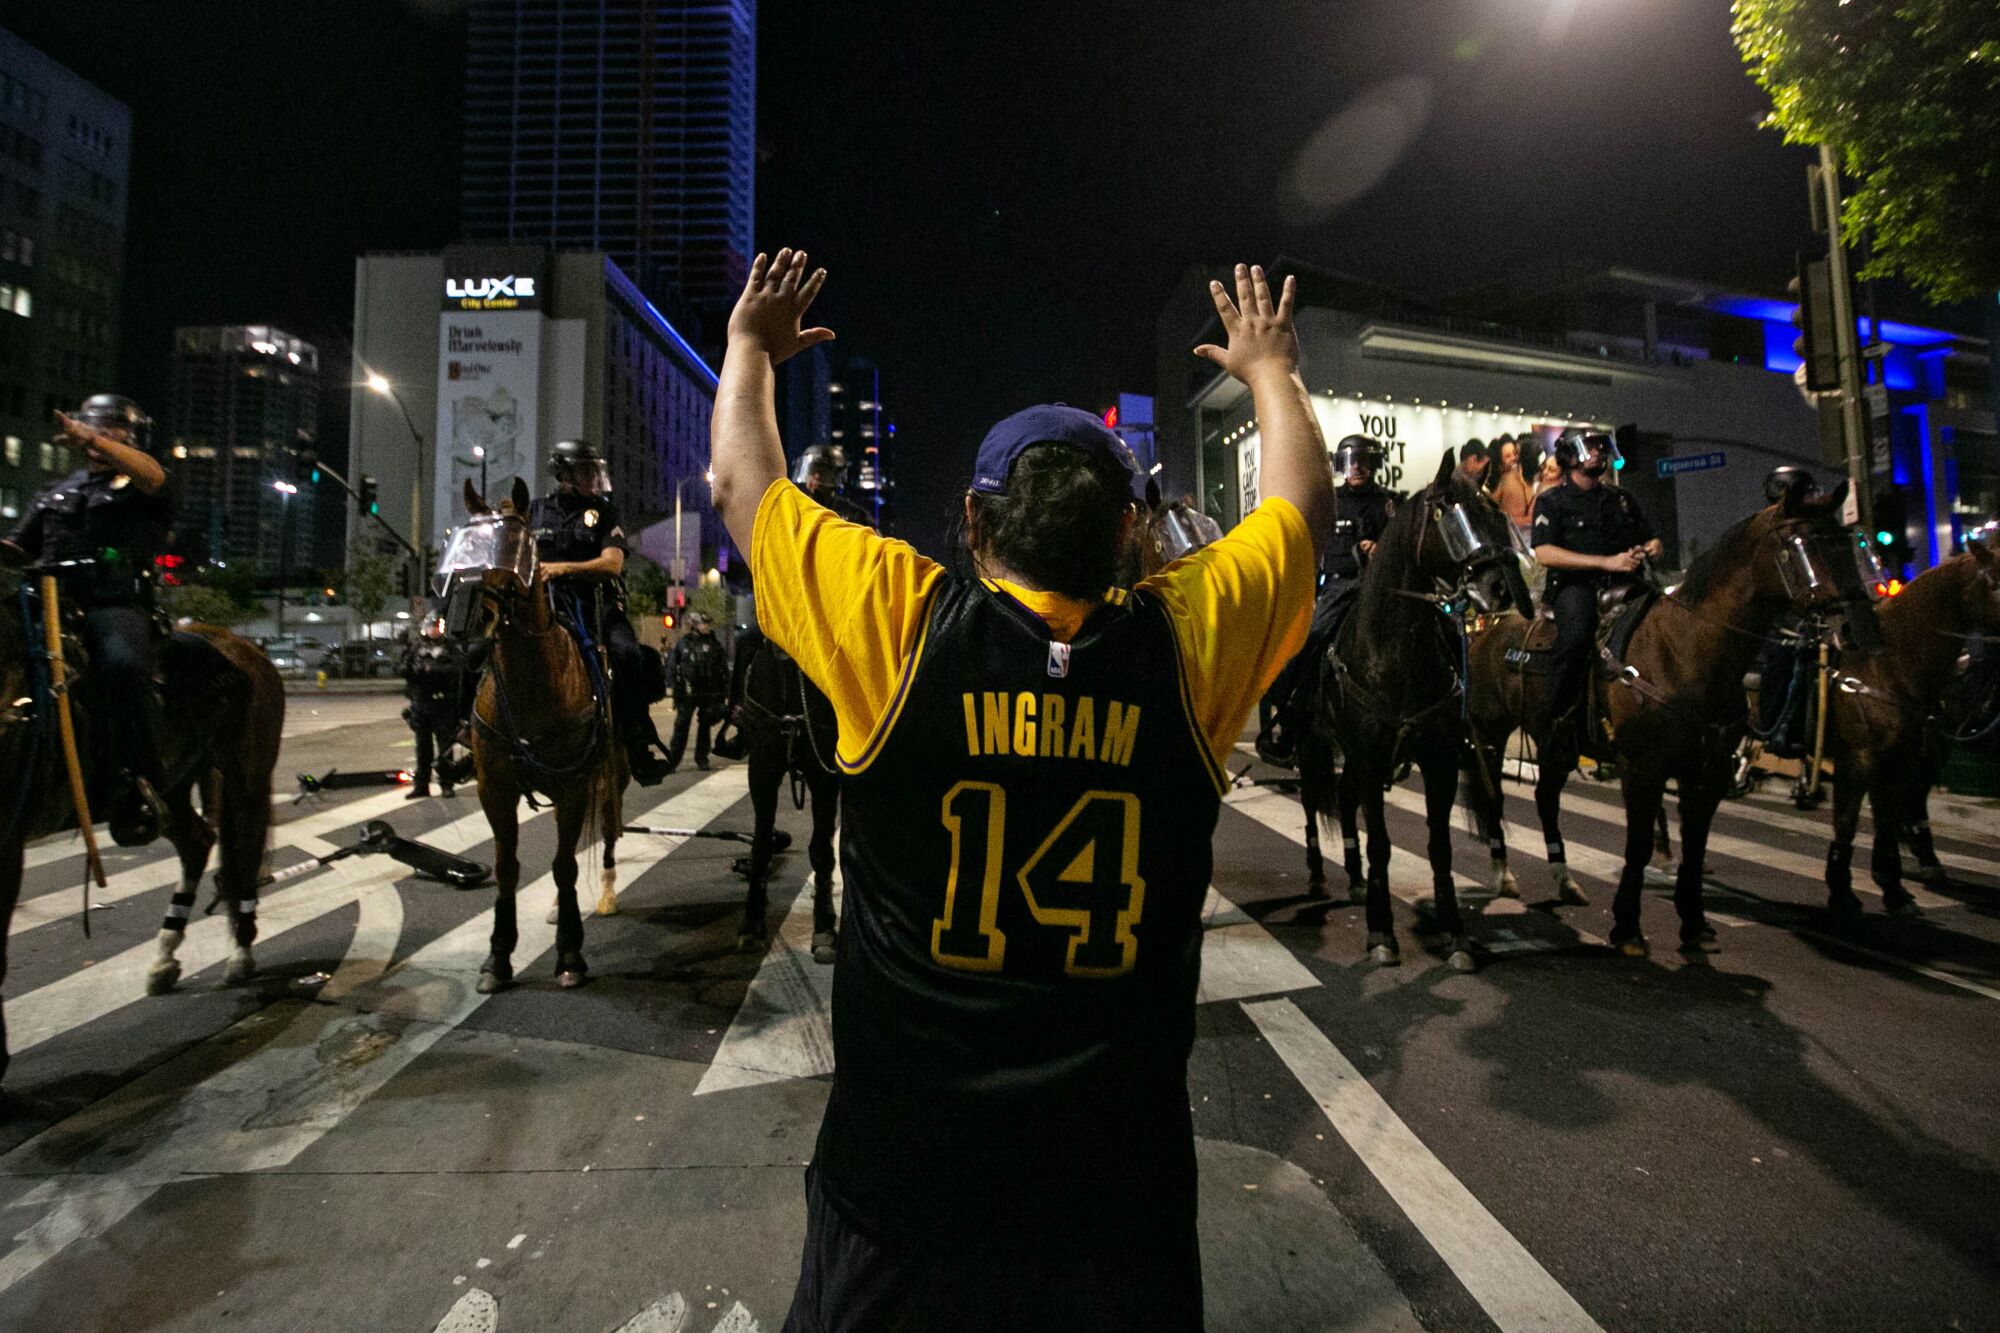 LAPD officers on horses clear the area near L.A. Live, declaring an unlawful assembly, after the Lakers’ win over the Miami
